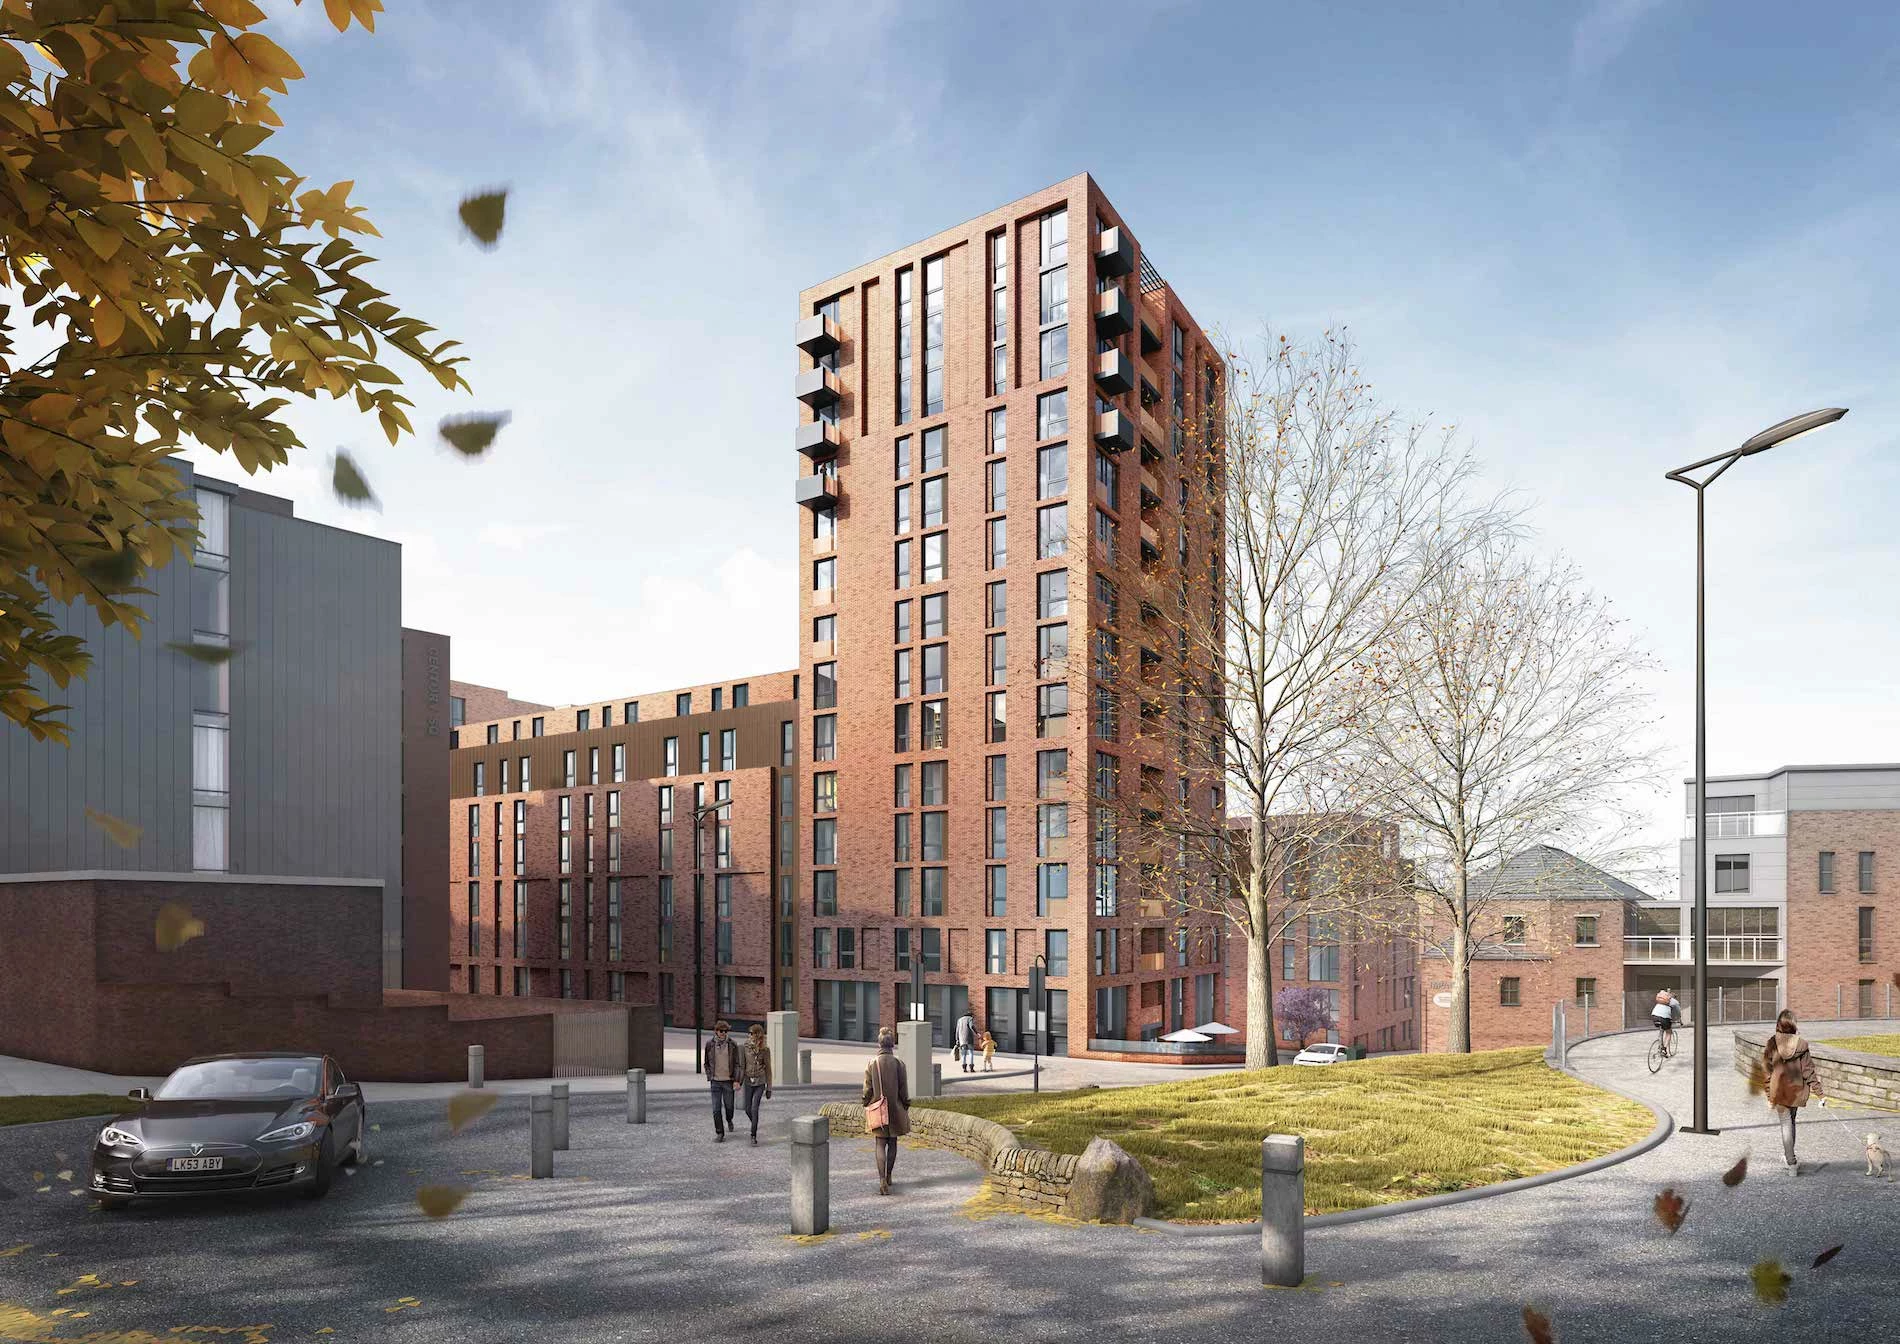 How the final phase of Panacea Property Development’s Well Meadow regeneration scheme will look on completion